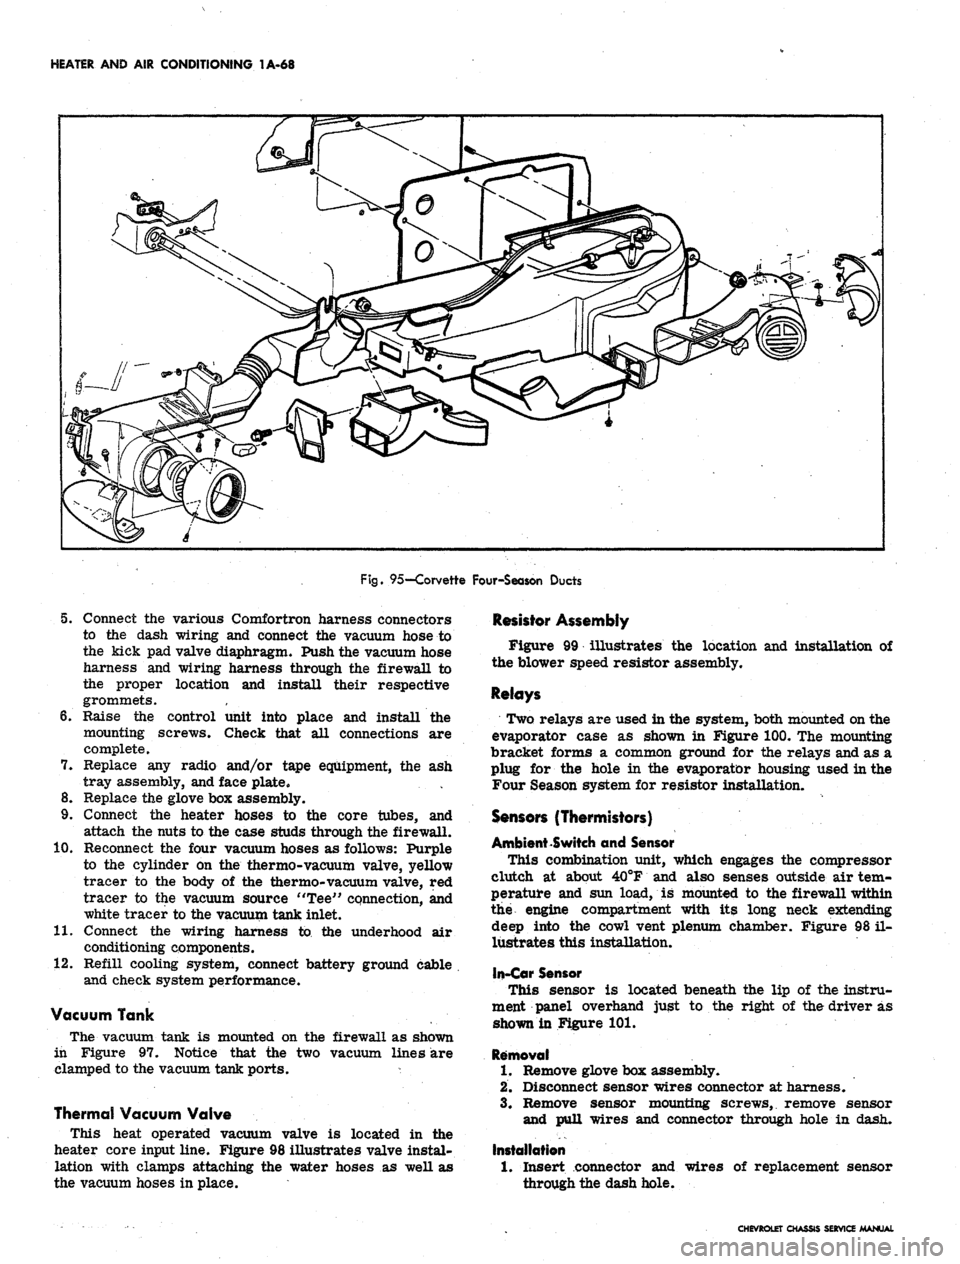 CHEVROLET CAMARO 1967 1.G Chassis Service Manual 
HEATER AND AIR CONDITIONING 1A-68

Fig.
 95—Corvette Four-Season Ducts

5. Connect the various Comfortron harness connectors

to the dash wiring and connect the vacuum hose to

the kick pad valve d